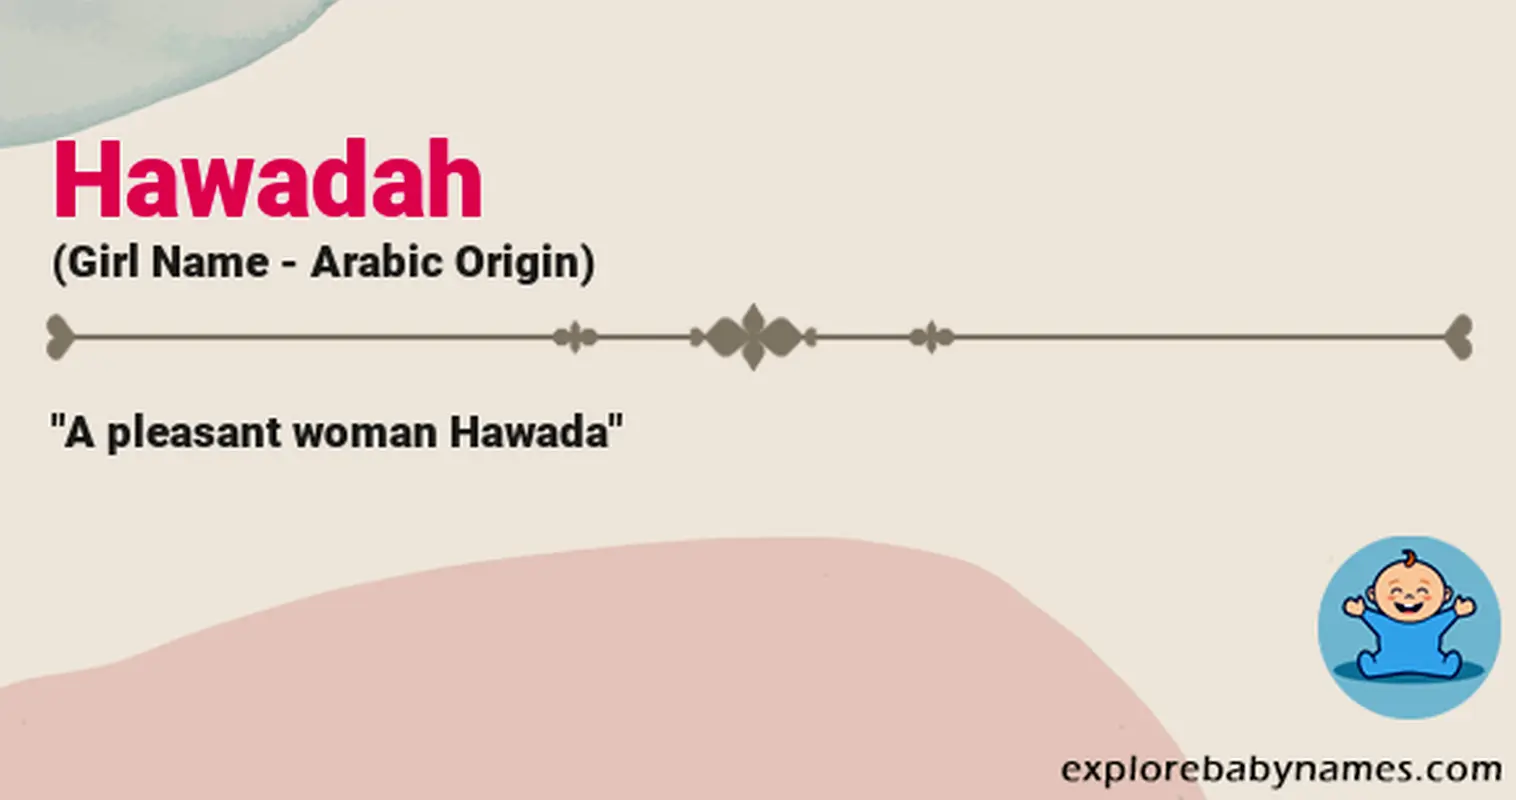 Meaning of Hawadah